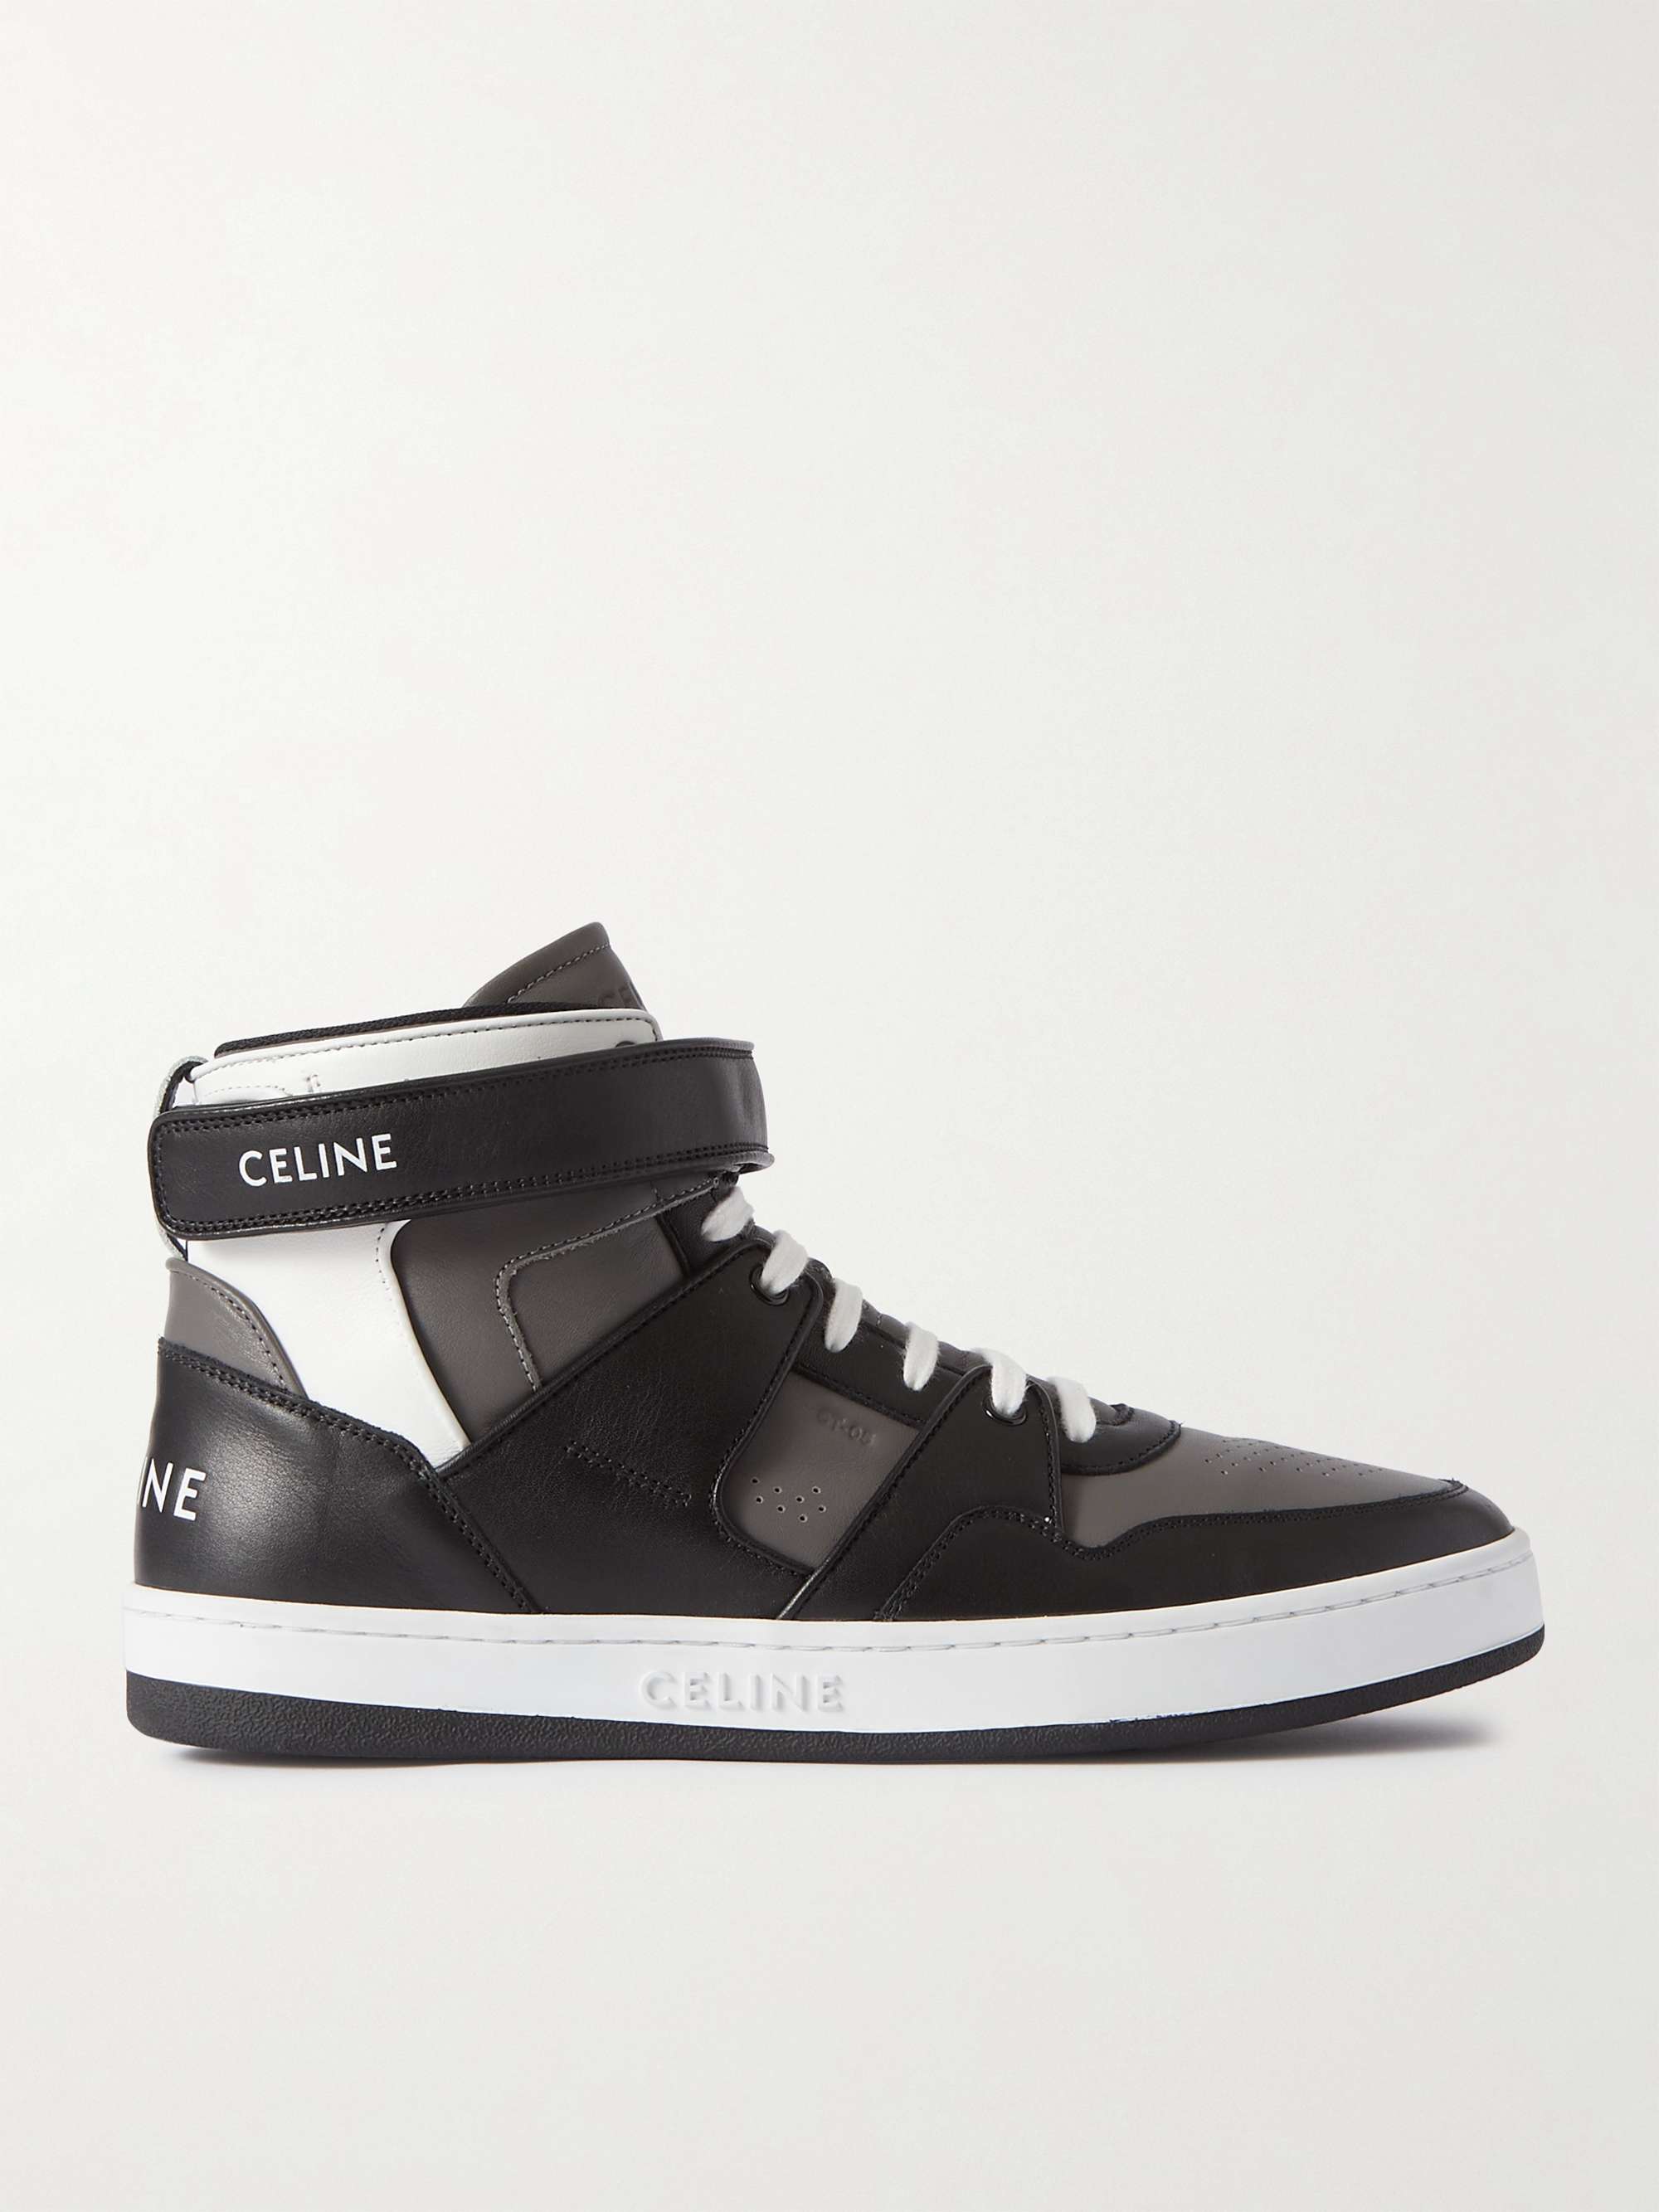 CELINE HOMME CT-05 Distressed Leather High-Top Sneakers